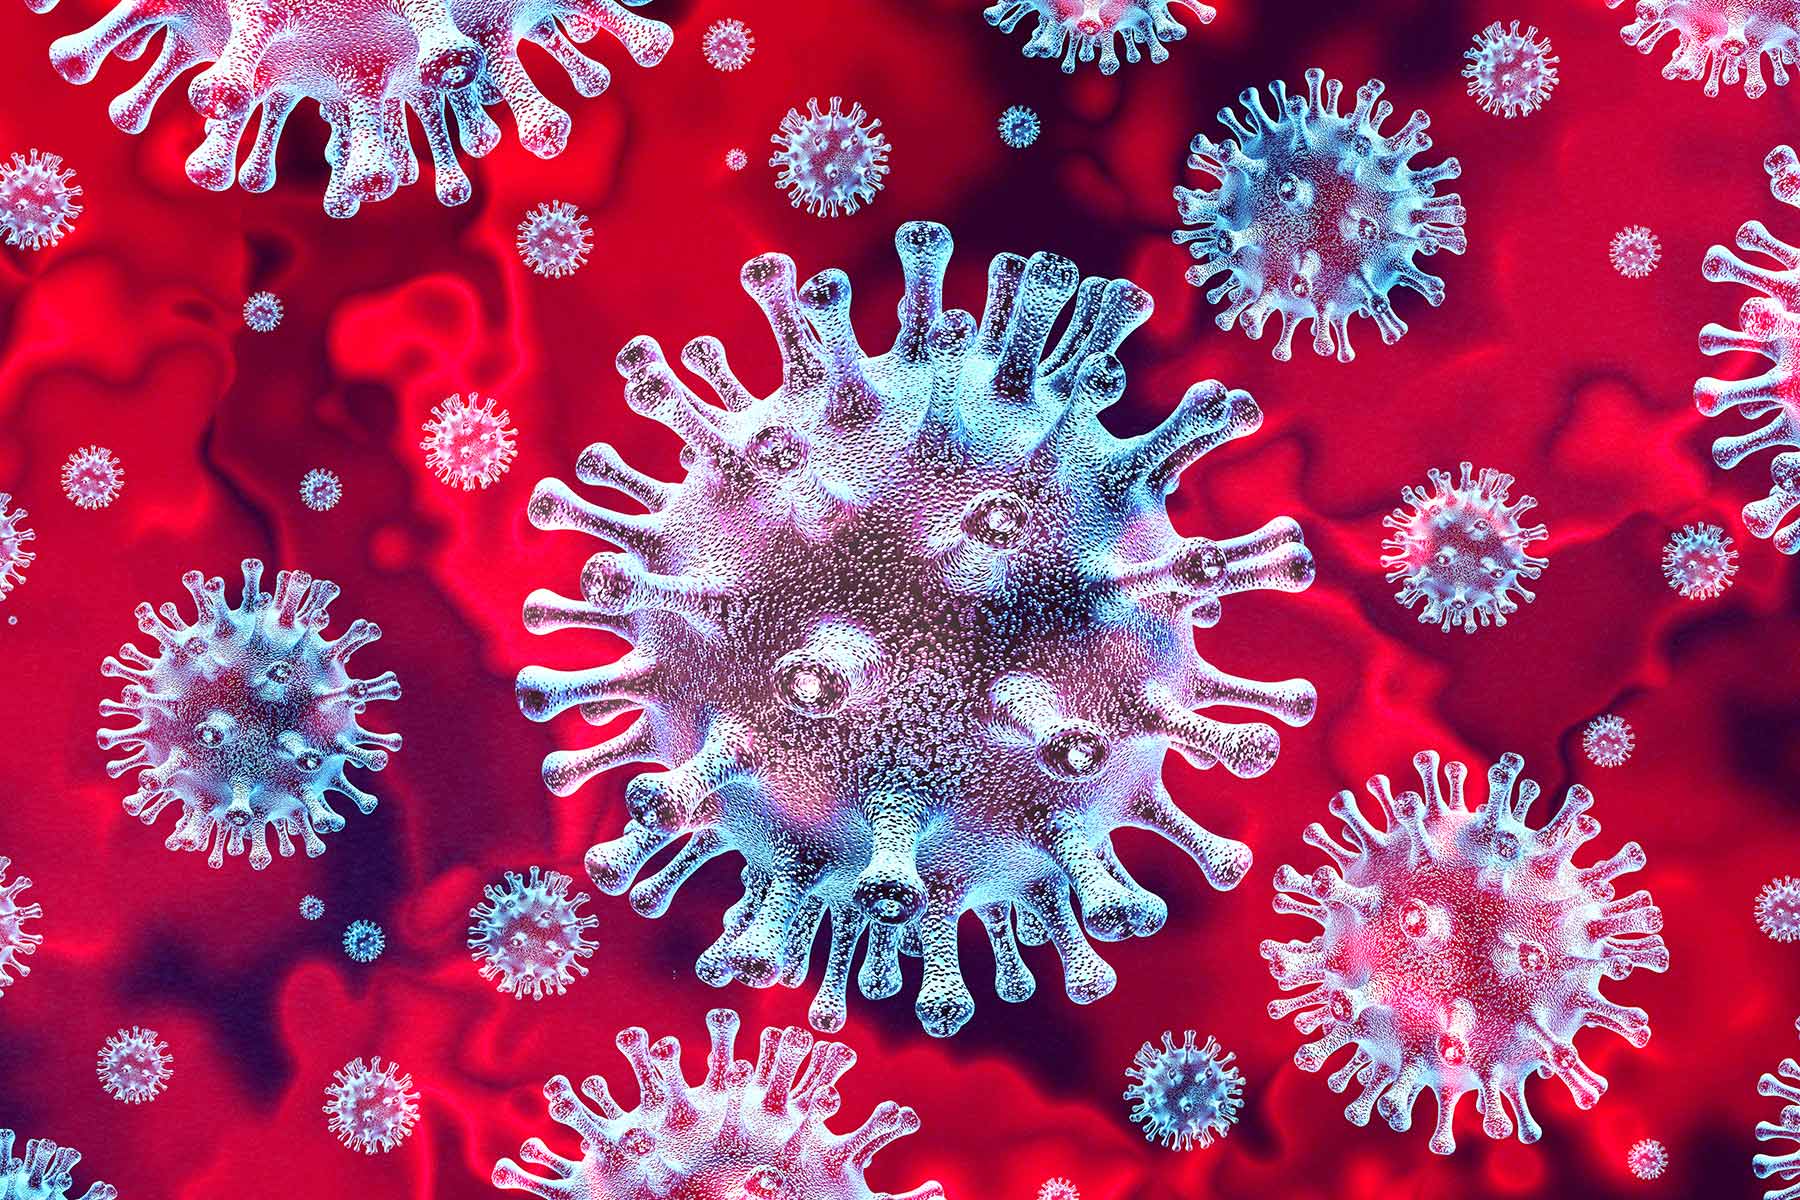 1800x1200_virus_3d_render_red_03_other